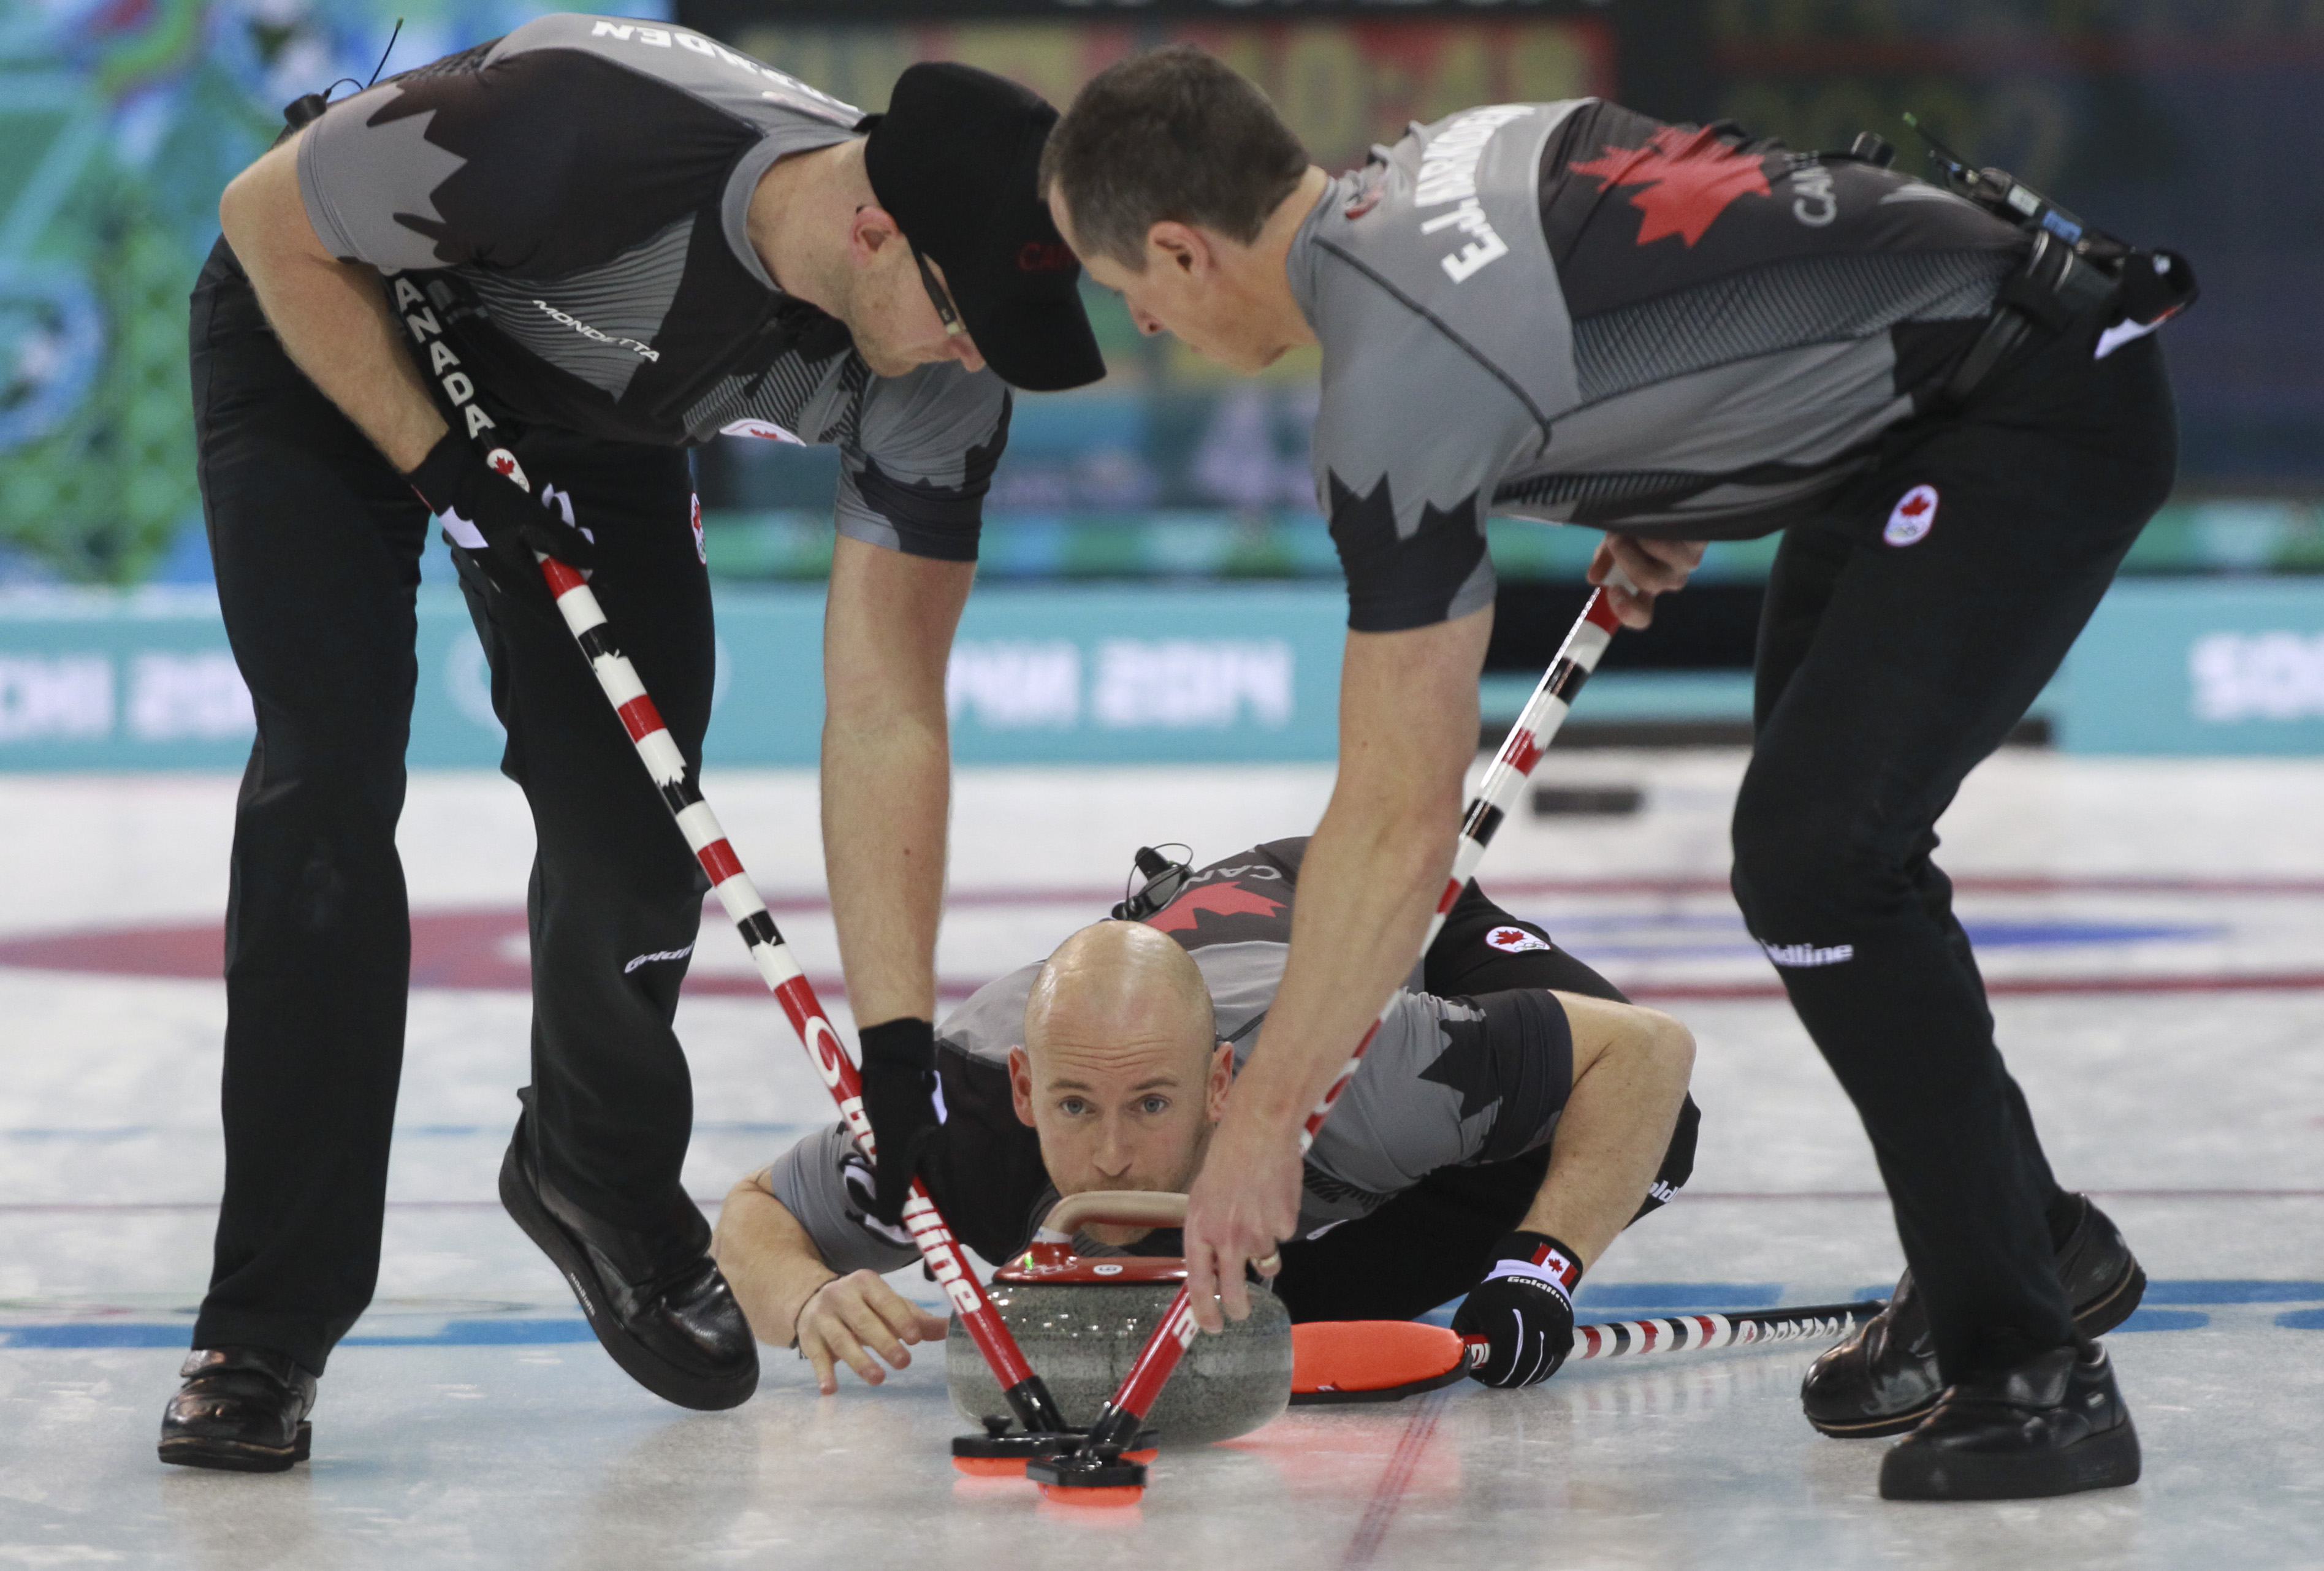 Brad Jacobs lost to Sweden 7 - 6 in an extra end at the Sochi Winter Olympics in Sochi, Russia, Tuesday, Feb. 11, 2014.  THE CANADIAN PRESS/HO, COC - Mike Ridewood